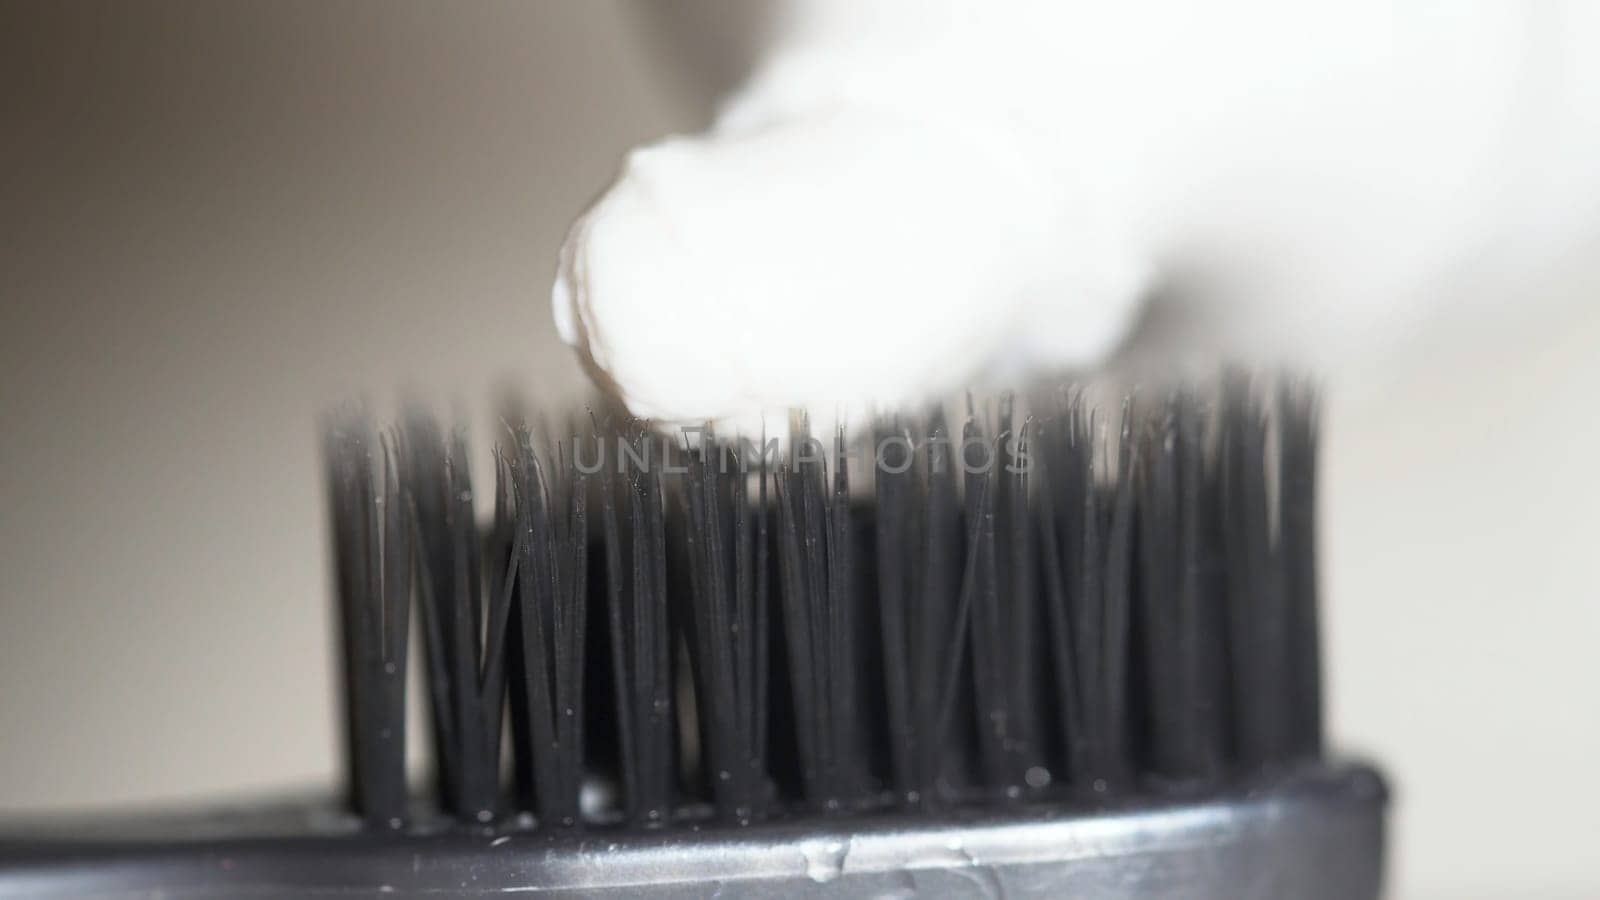 Extreme close up for a black toothbrush with white toothpaste being squeezed on it on beige background. Media. The black bristles of the toothbrush with white toothpaste, dental care concept. by Mediawhalestock